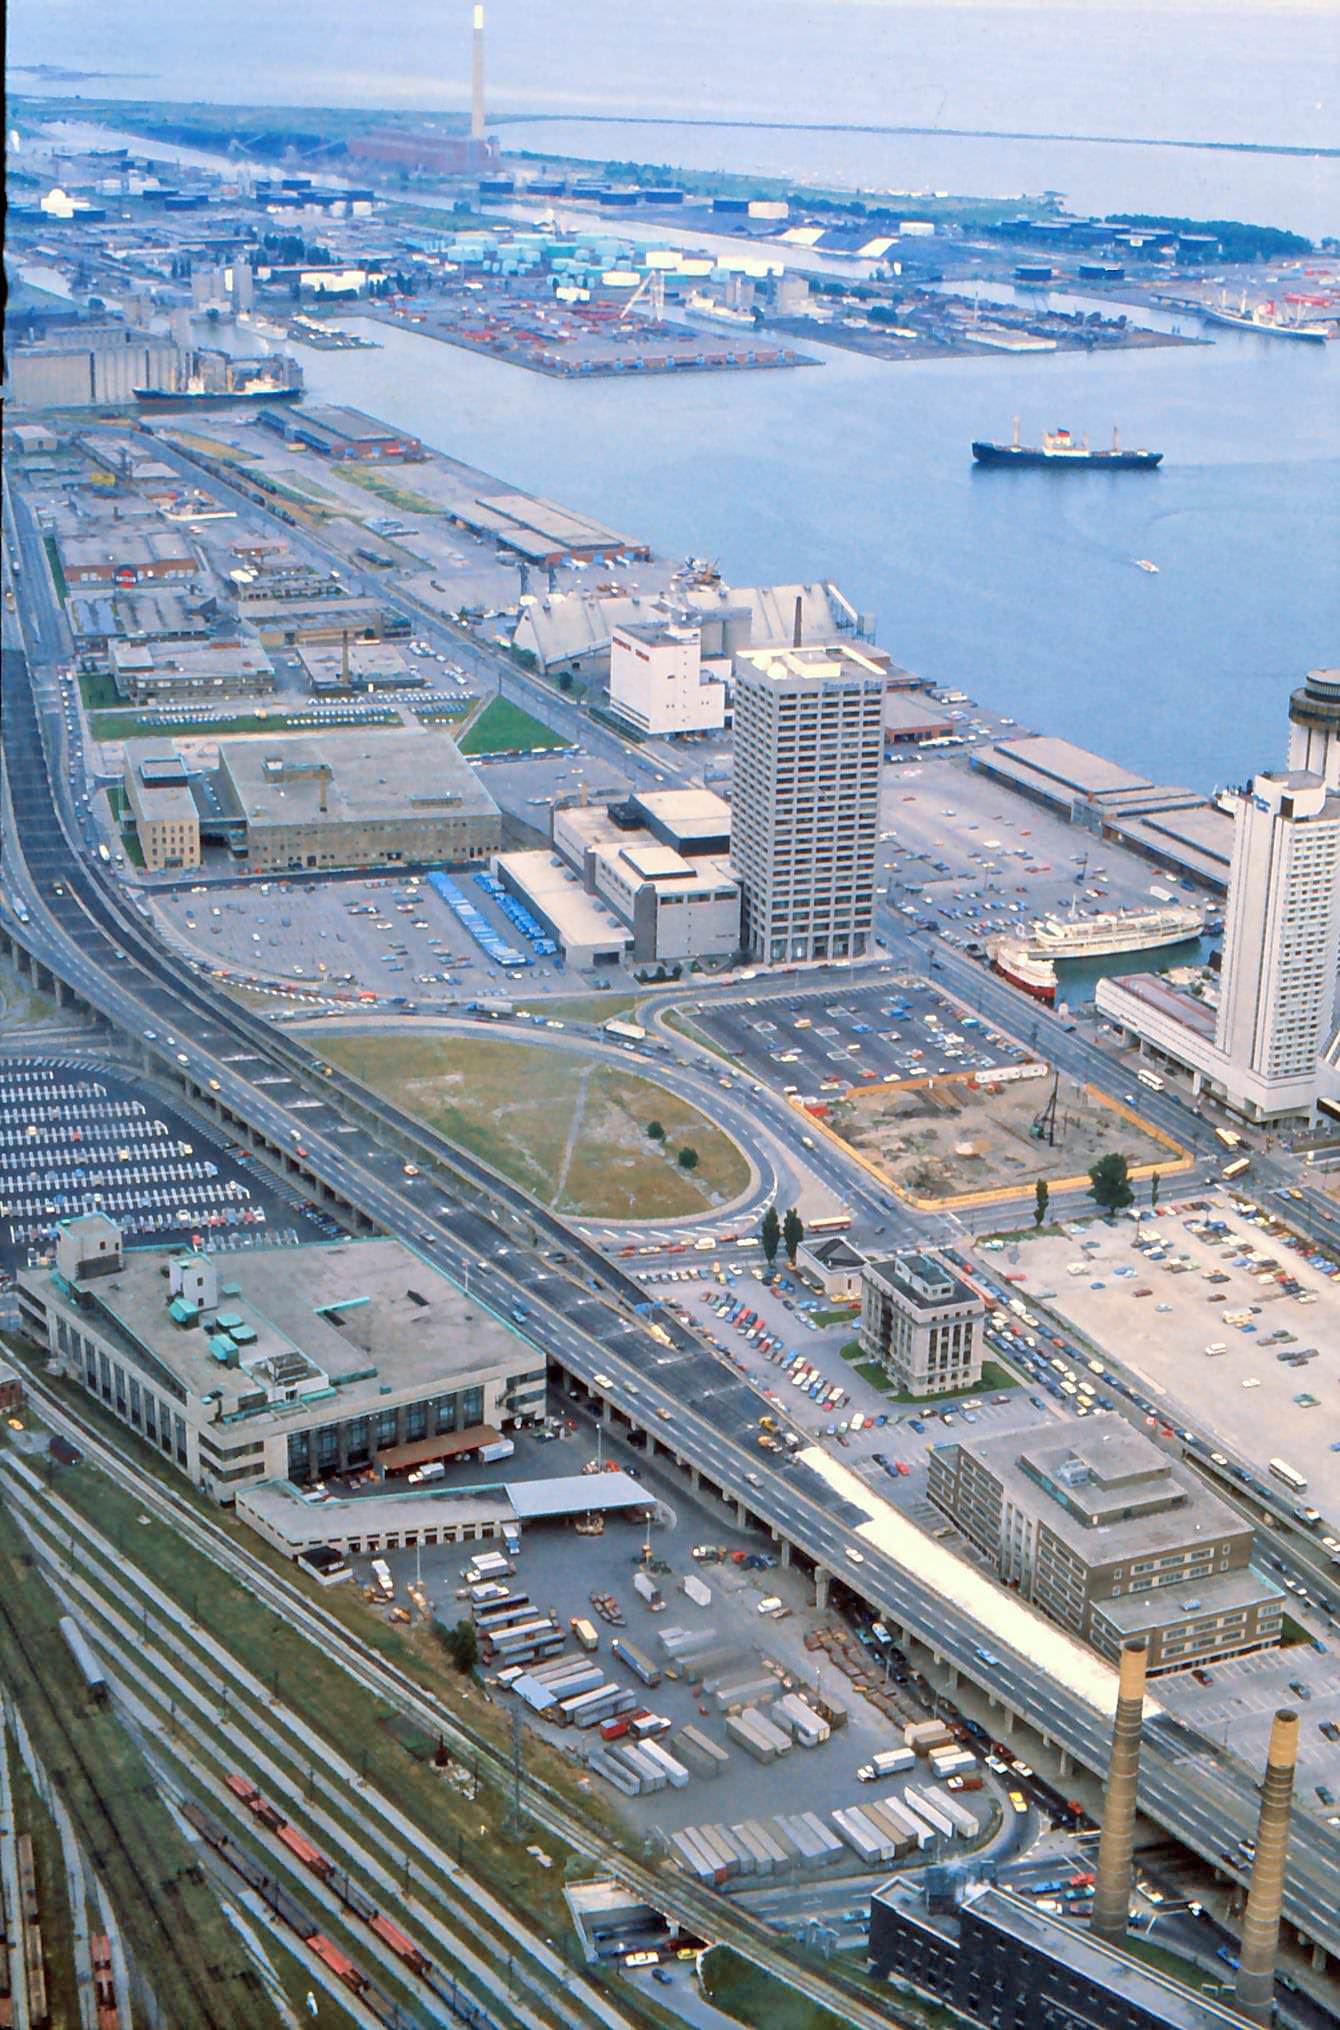 CN Tower view of the harbor front and docklands, late 1970s.